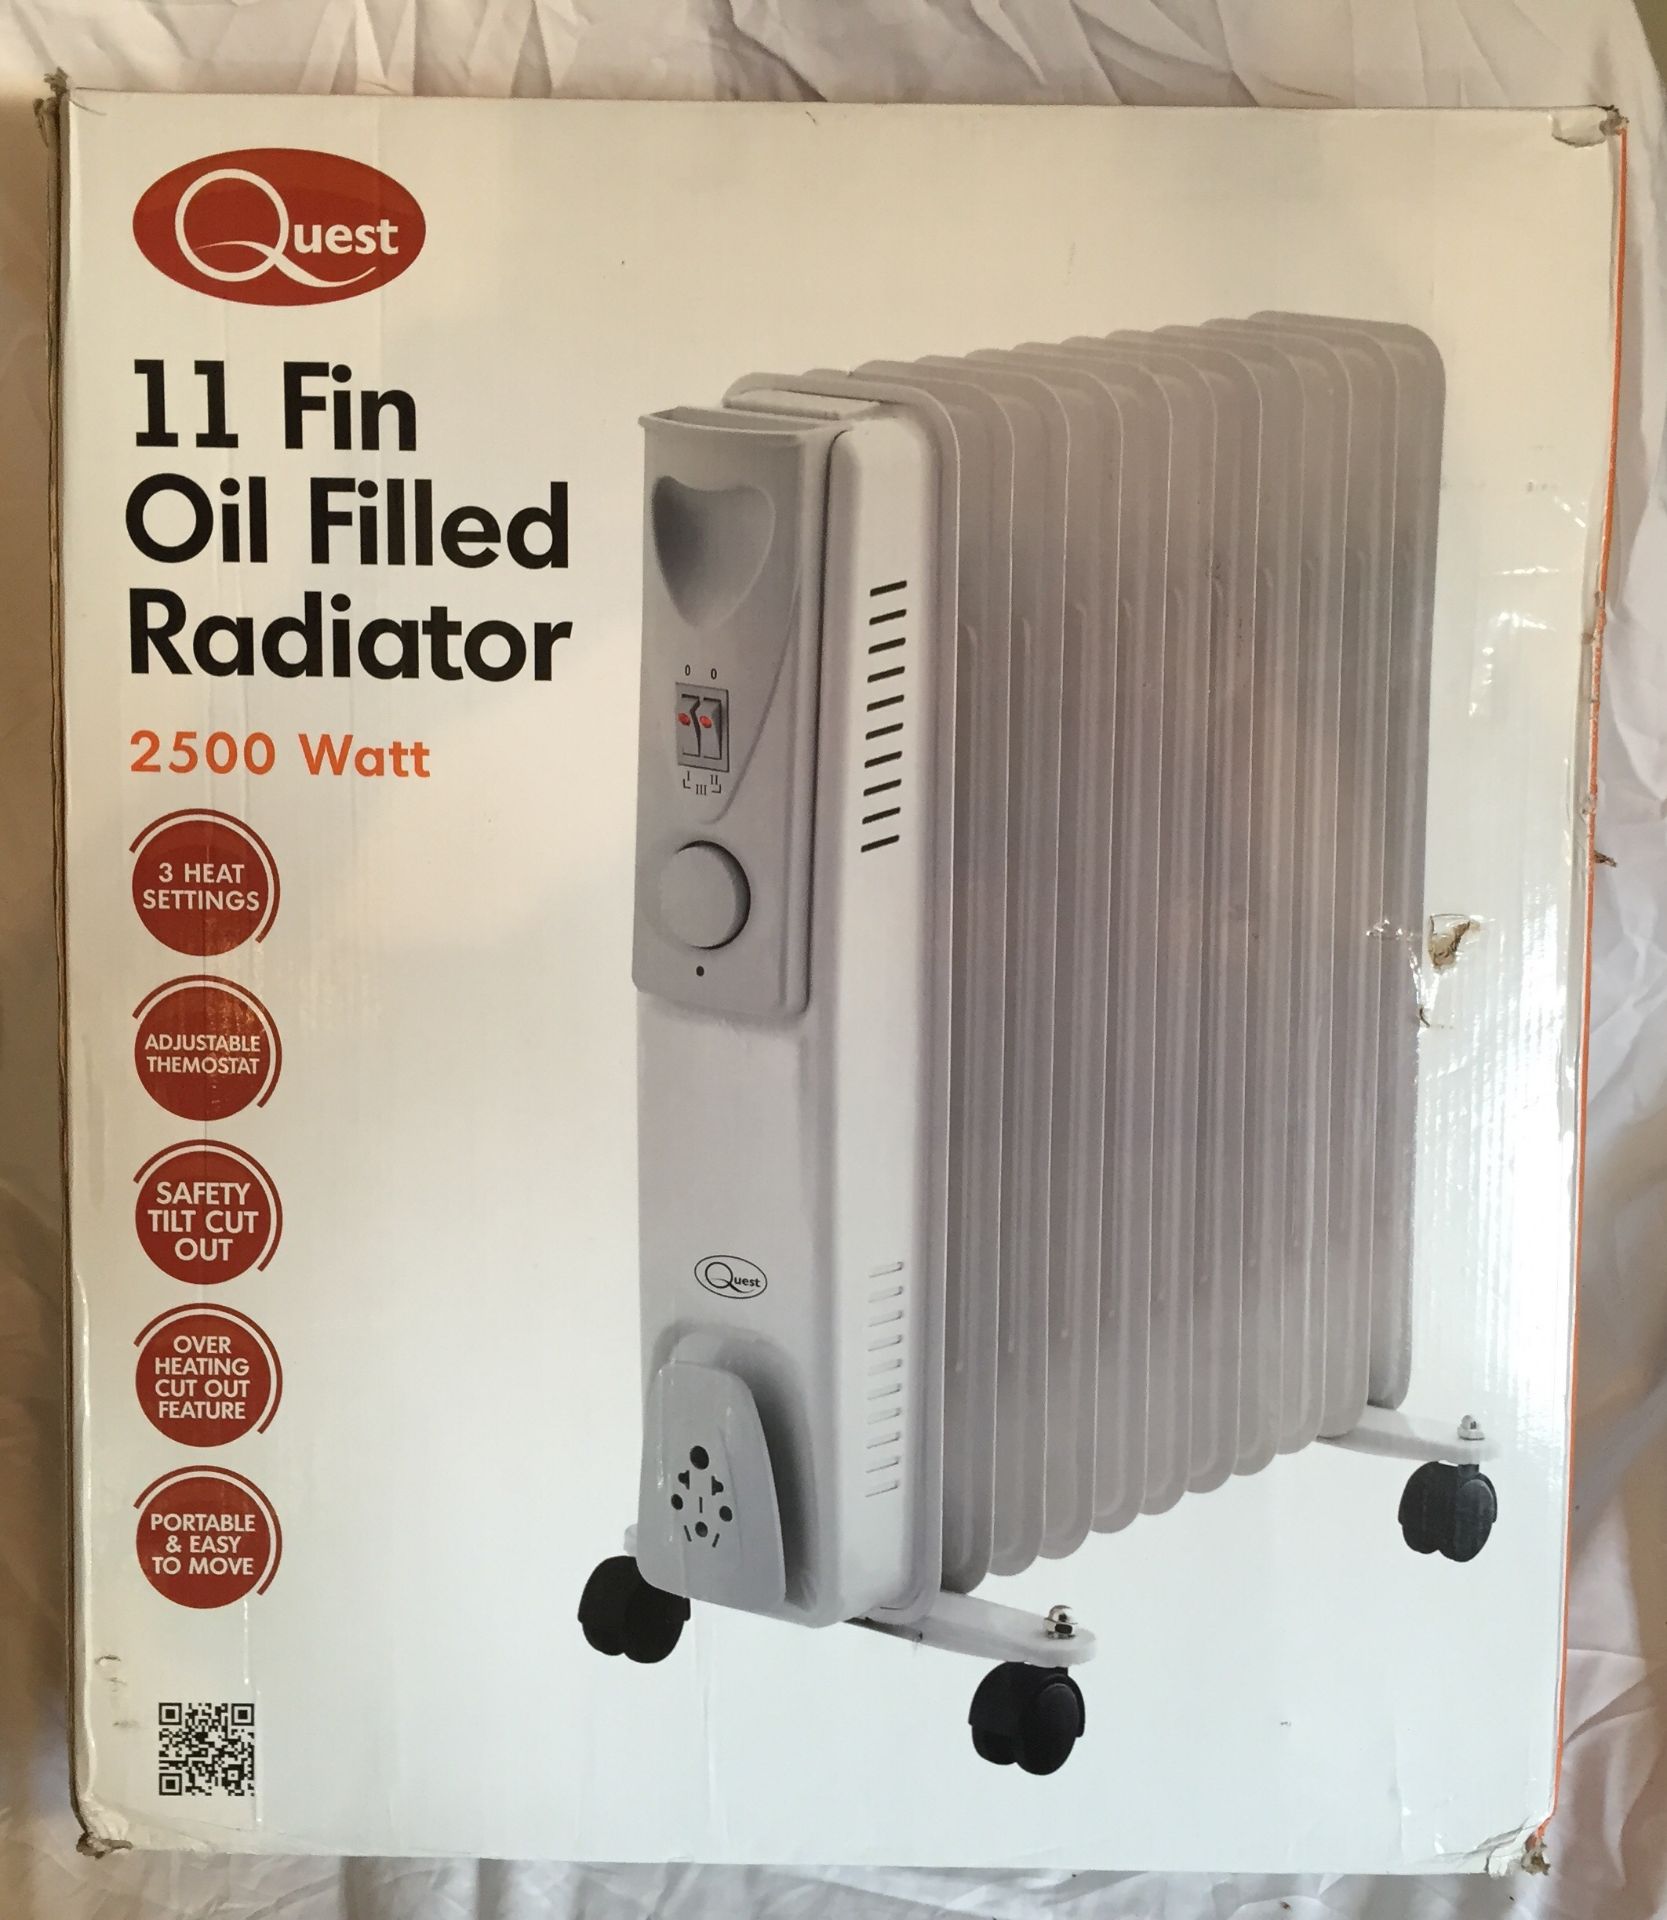 Quest Tall Oil Filled Radiator, 2500 Watt – RRP- £59.99
Quick & Easy To Assemble
Portable & Easy To - Image 2 of 2